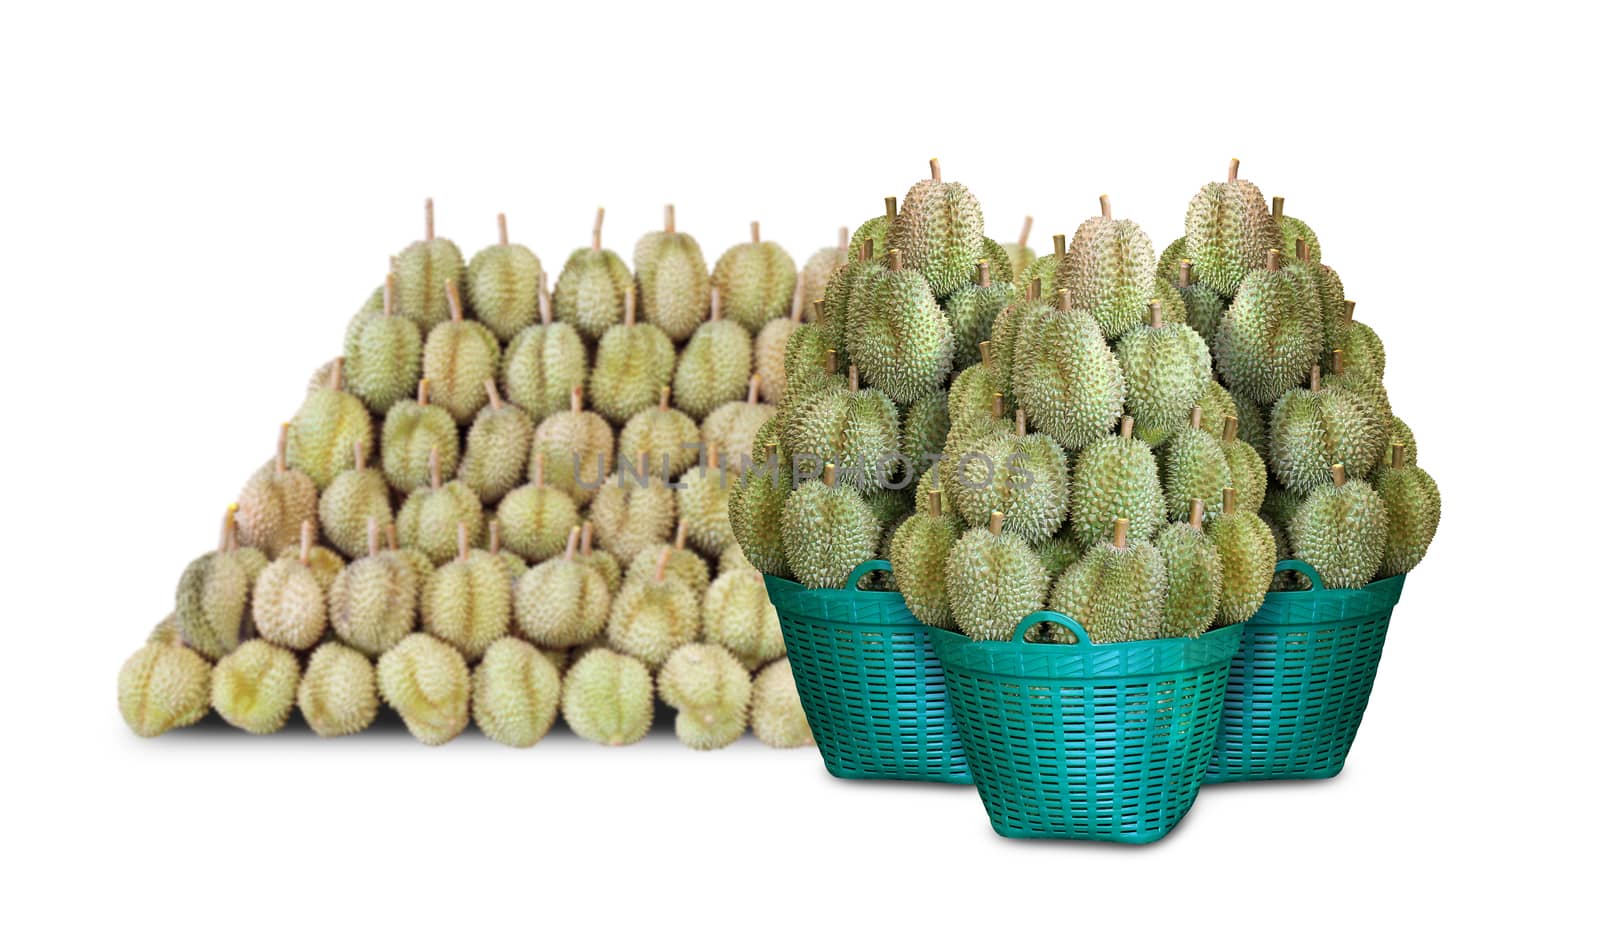 Pile of Durian, Durian fruit in a green basket for sale, Durian is king of fruits southeast Thailand, Durian many on white background